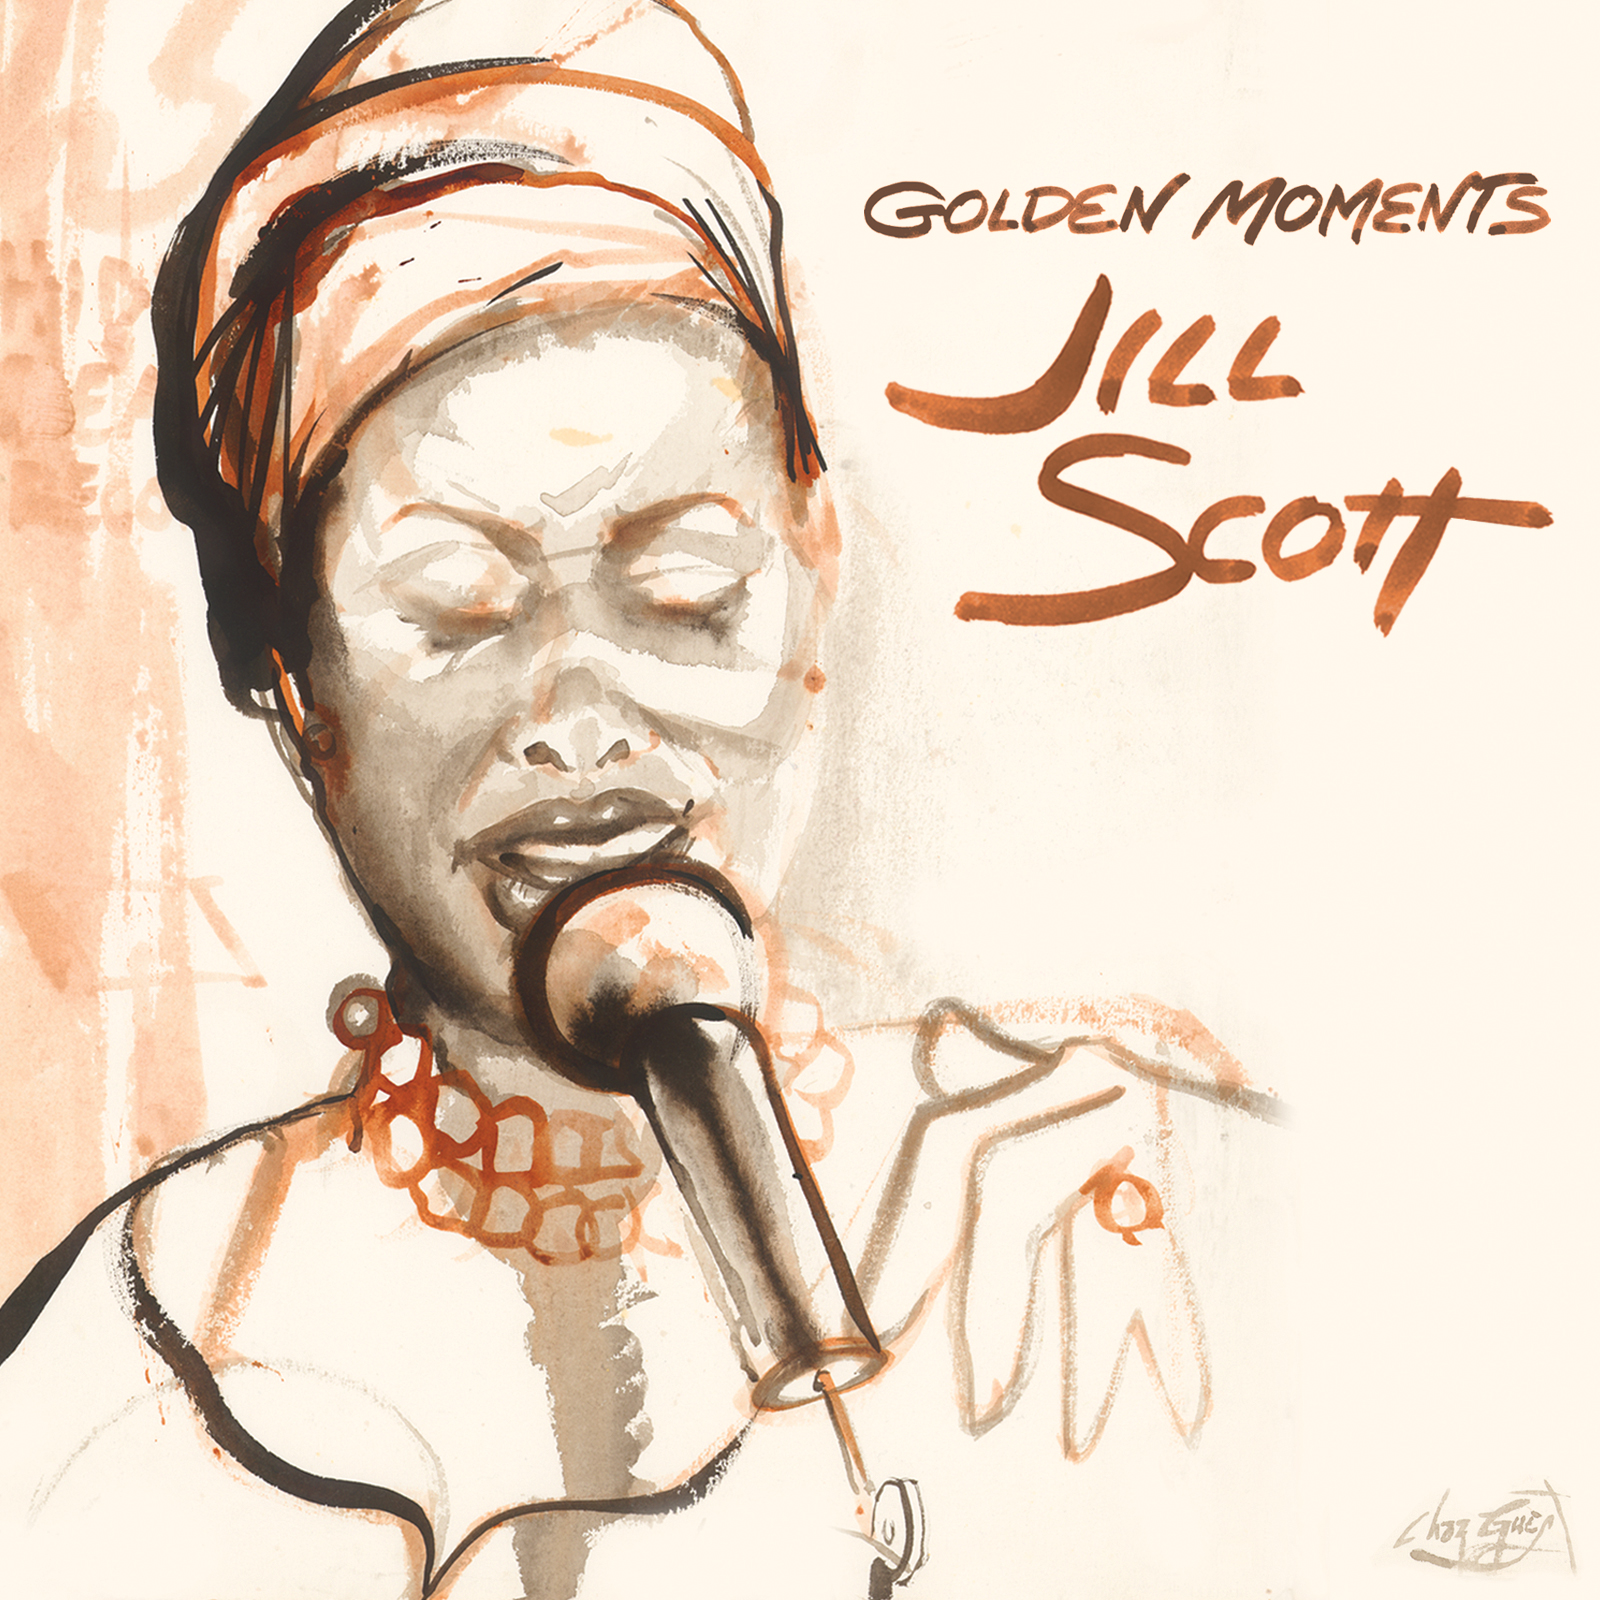 Hidden Beach Recordings hand drawing of one of their Golden Moments, Jill Scott performing here song "Golden" live